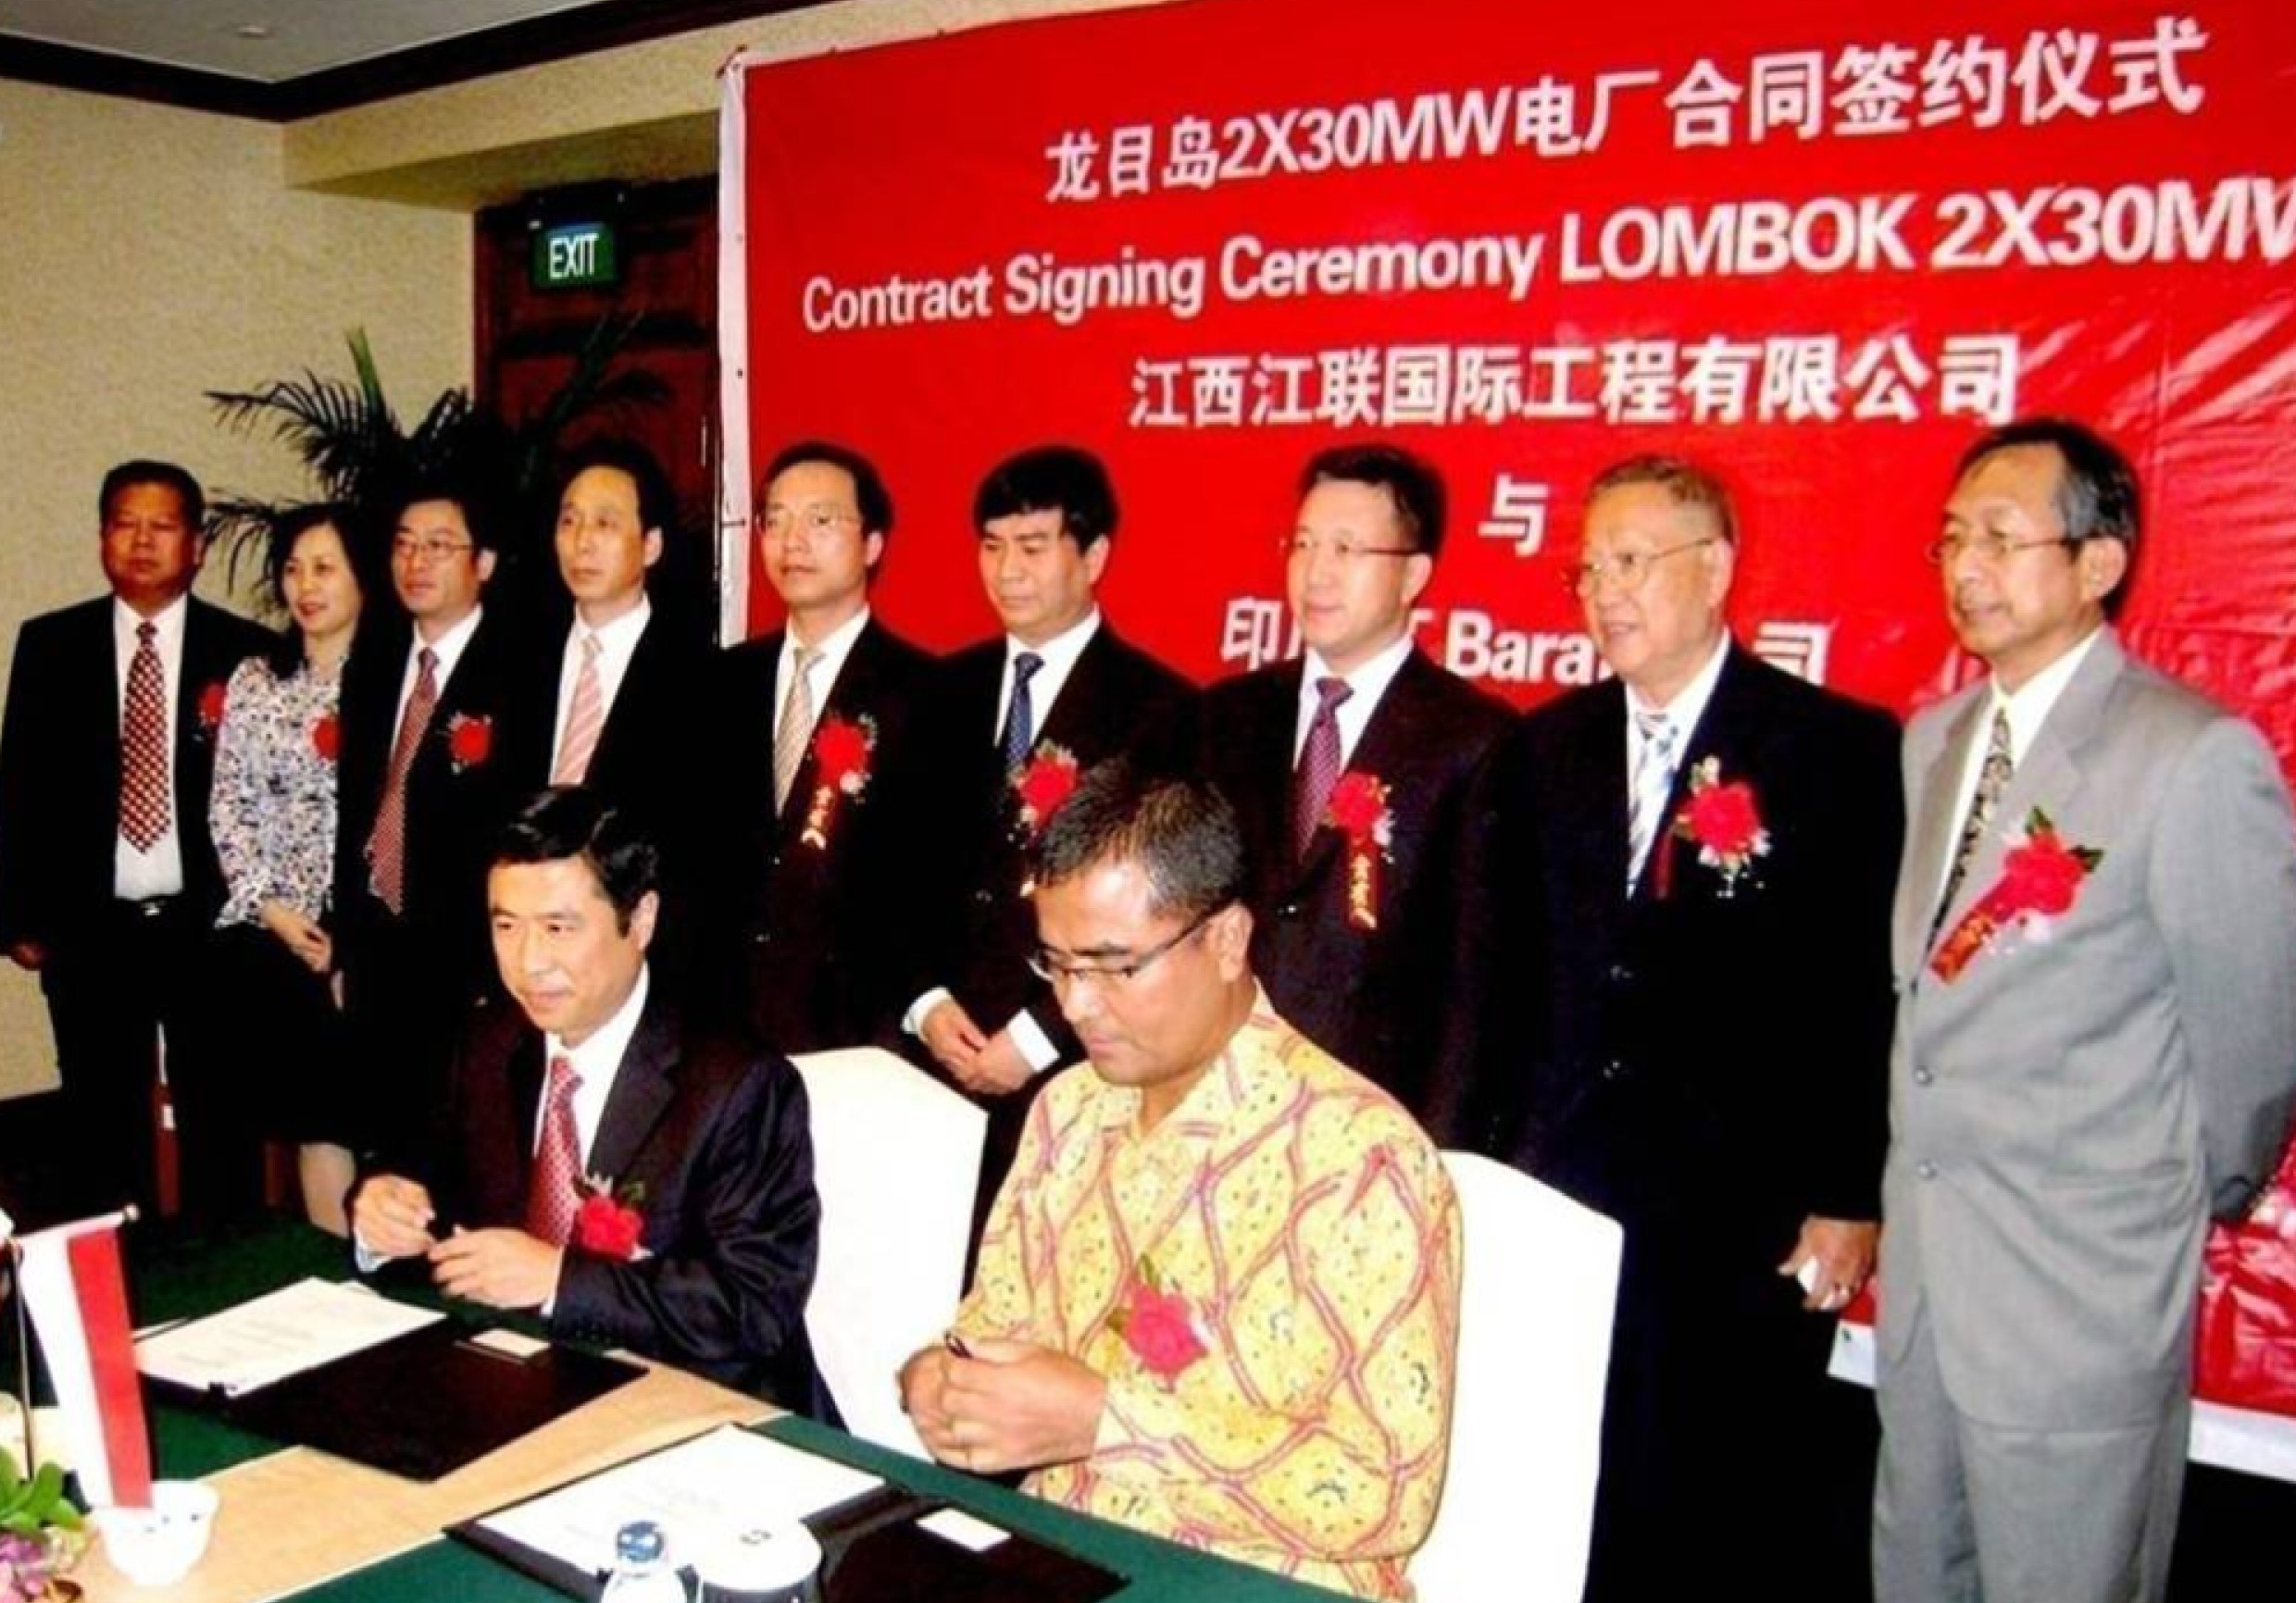 Company leaders sign engineering projects in Indonesia